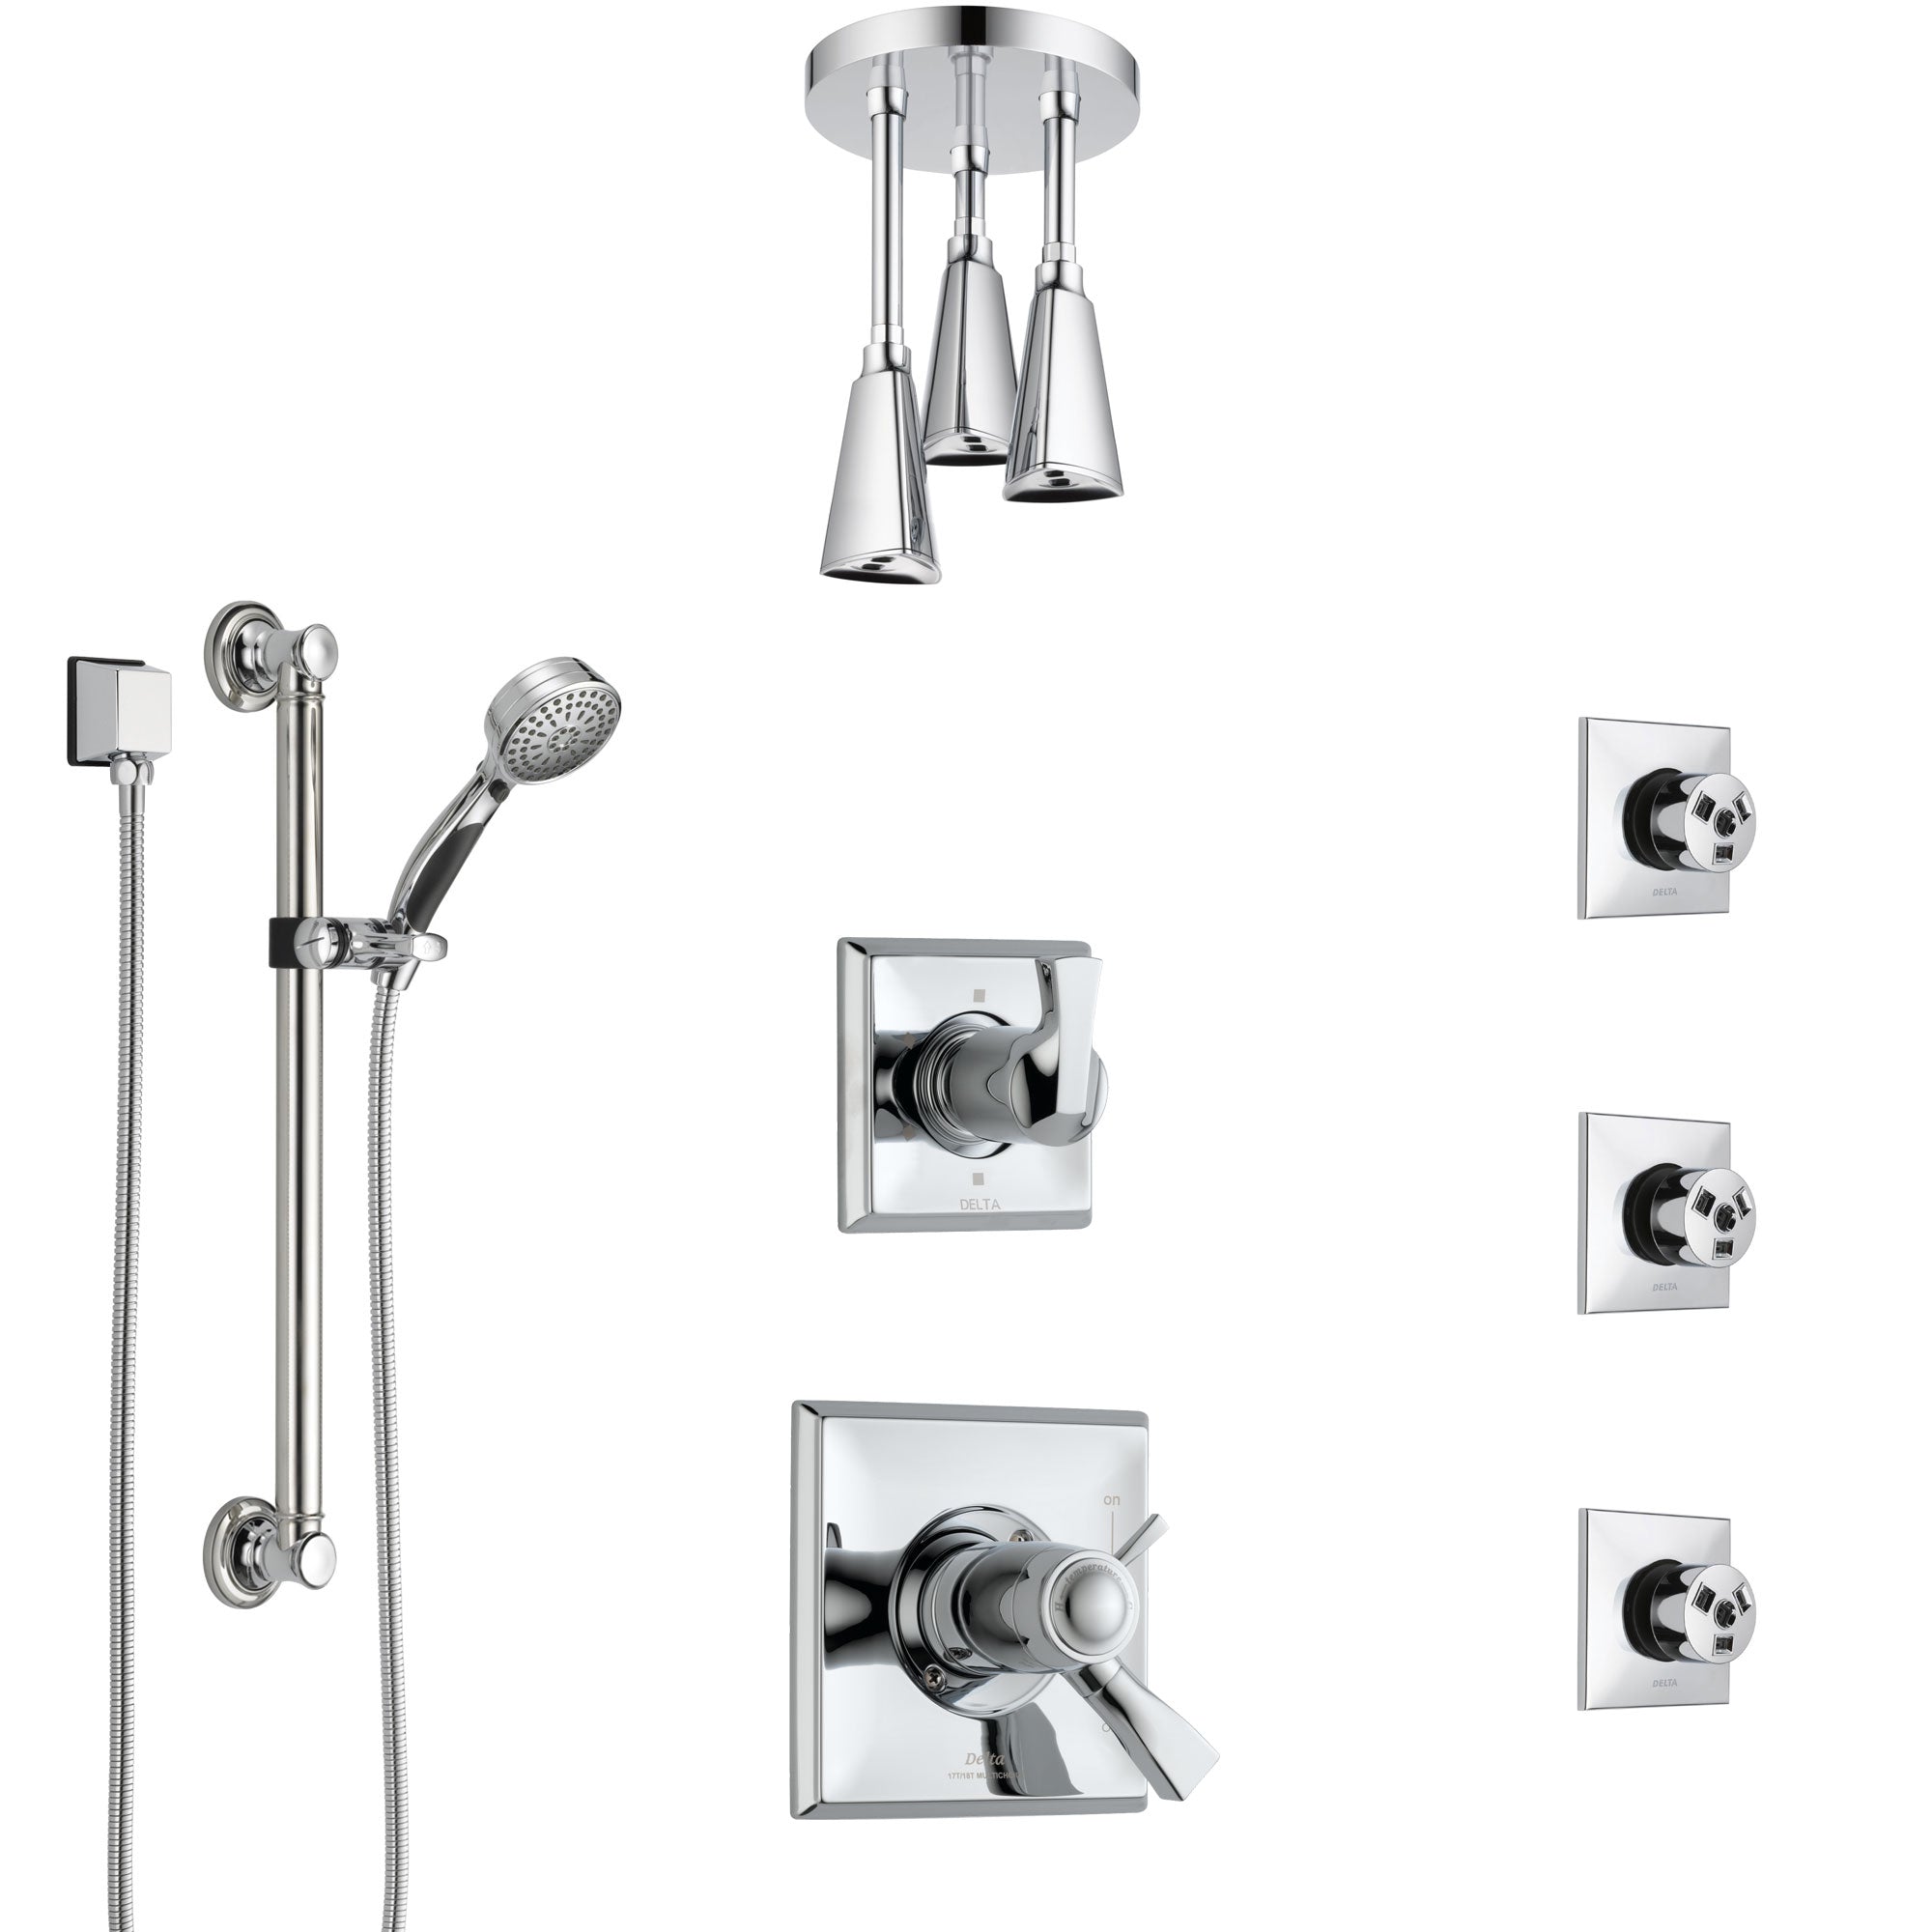 Delta Dryden Chrome Shower System with Dual Thermostatic Control, Diverter, Ceiling Showerhead, 3 Body Sprays, and Grab Bar Hand Shower SS17T5123